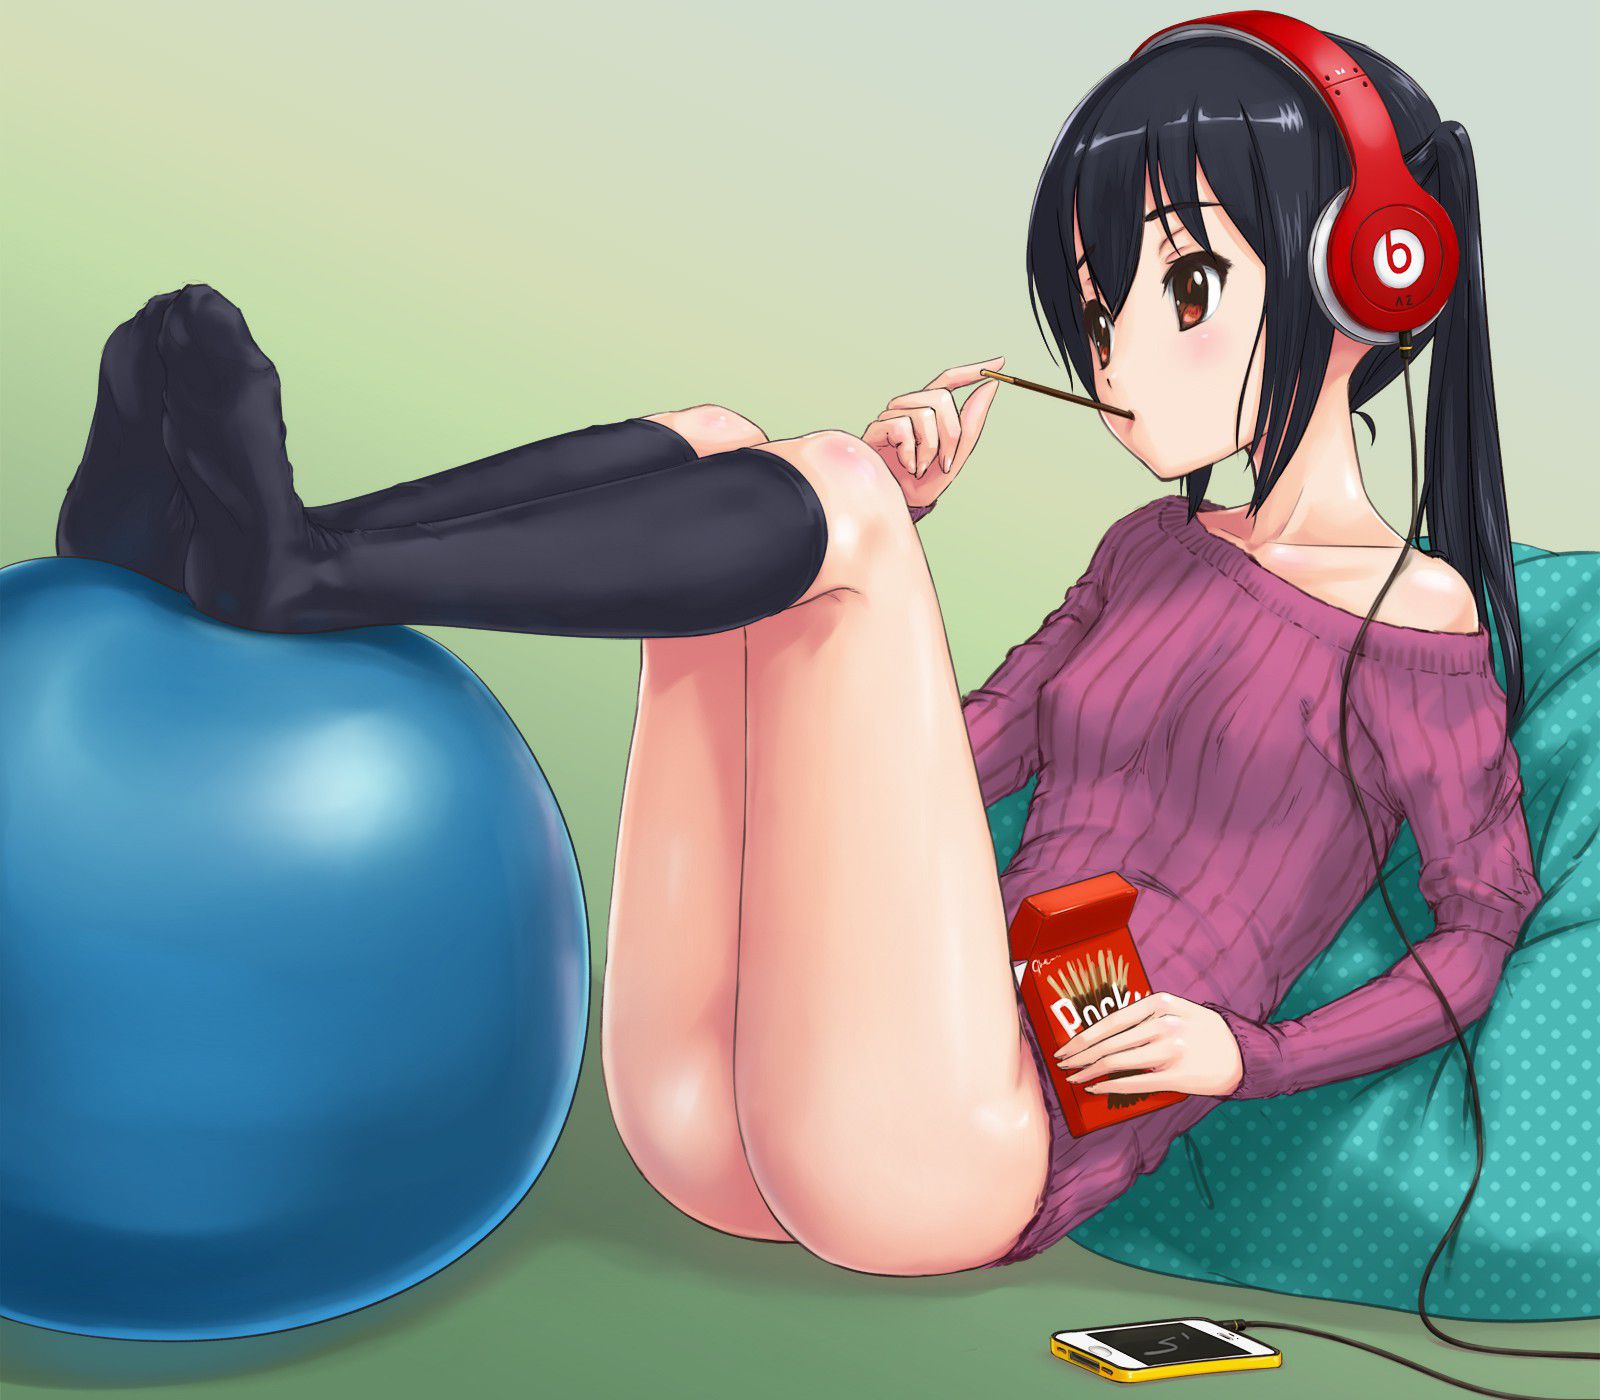 [Secondary] girl I have the headphones (headphones) [images] 21